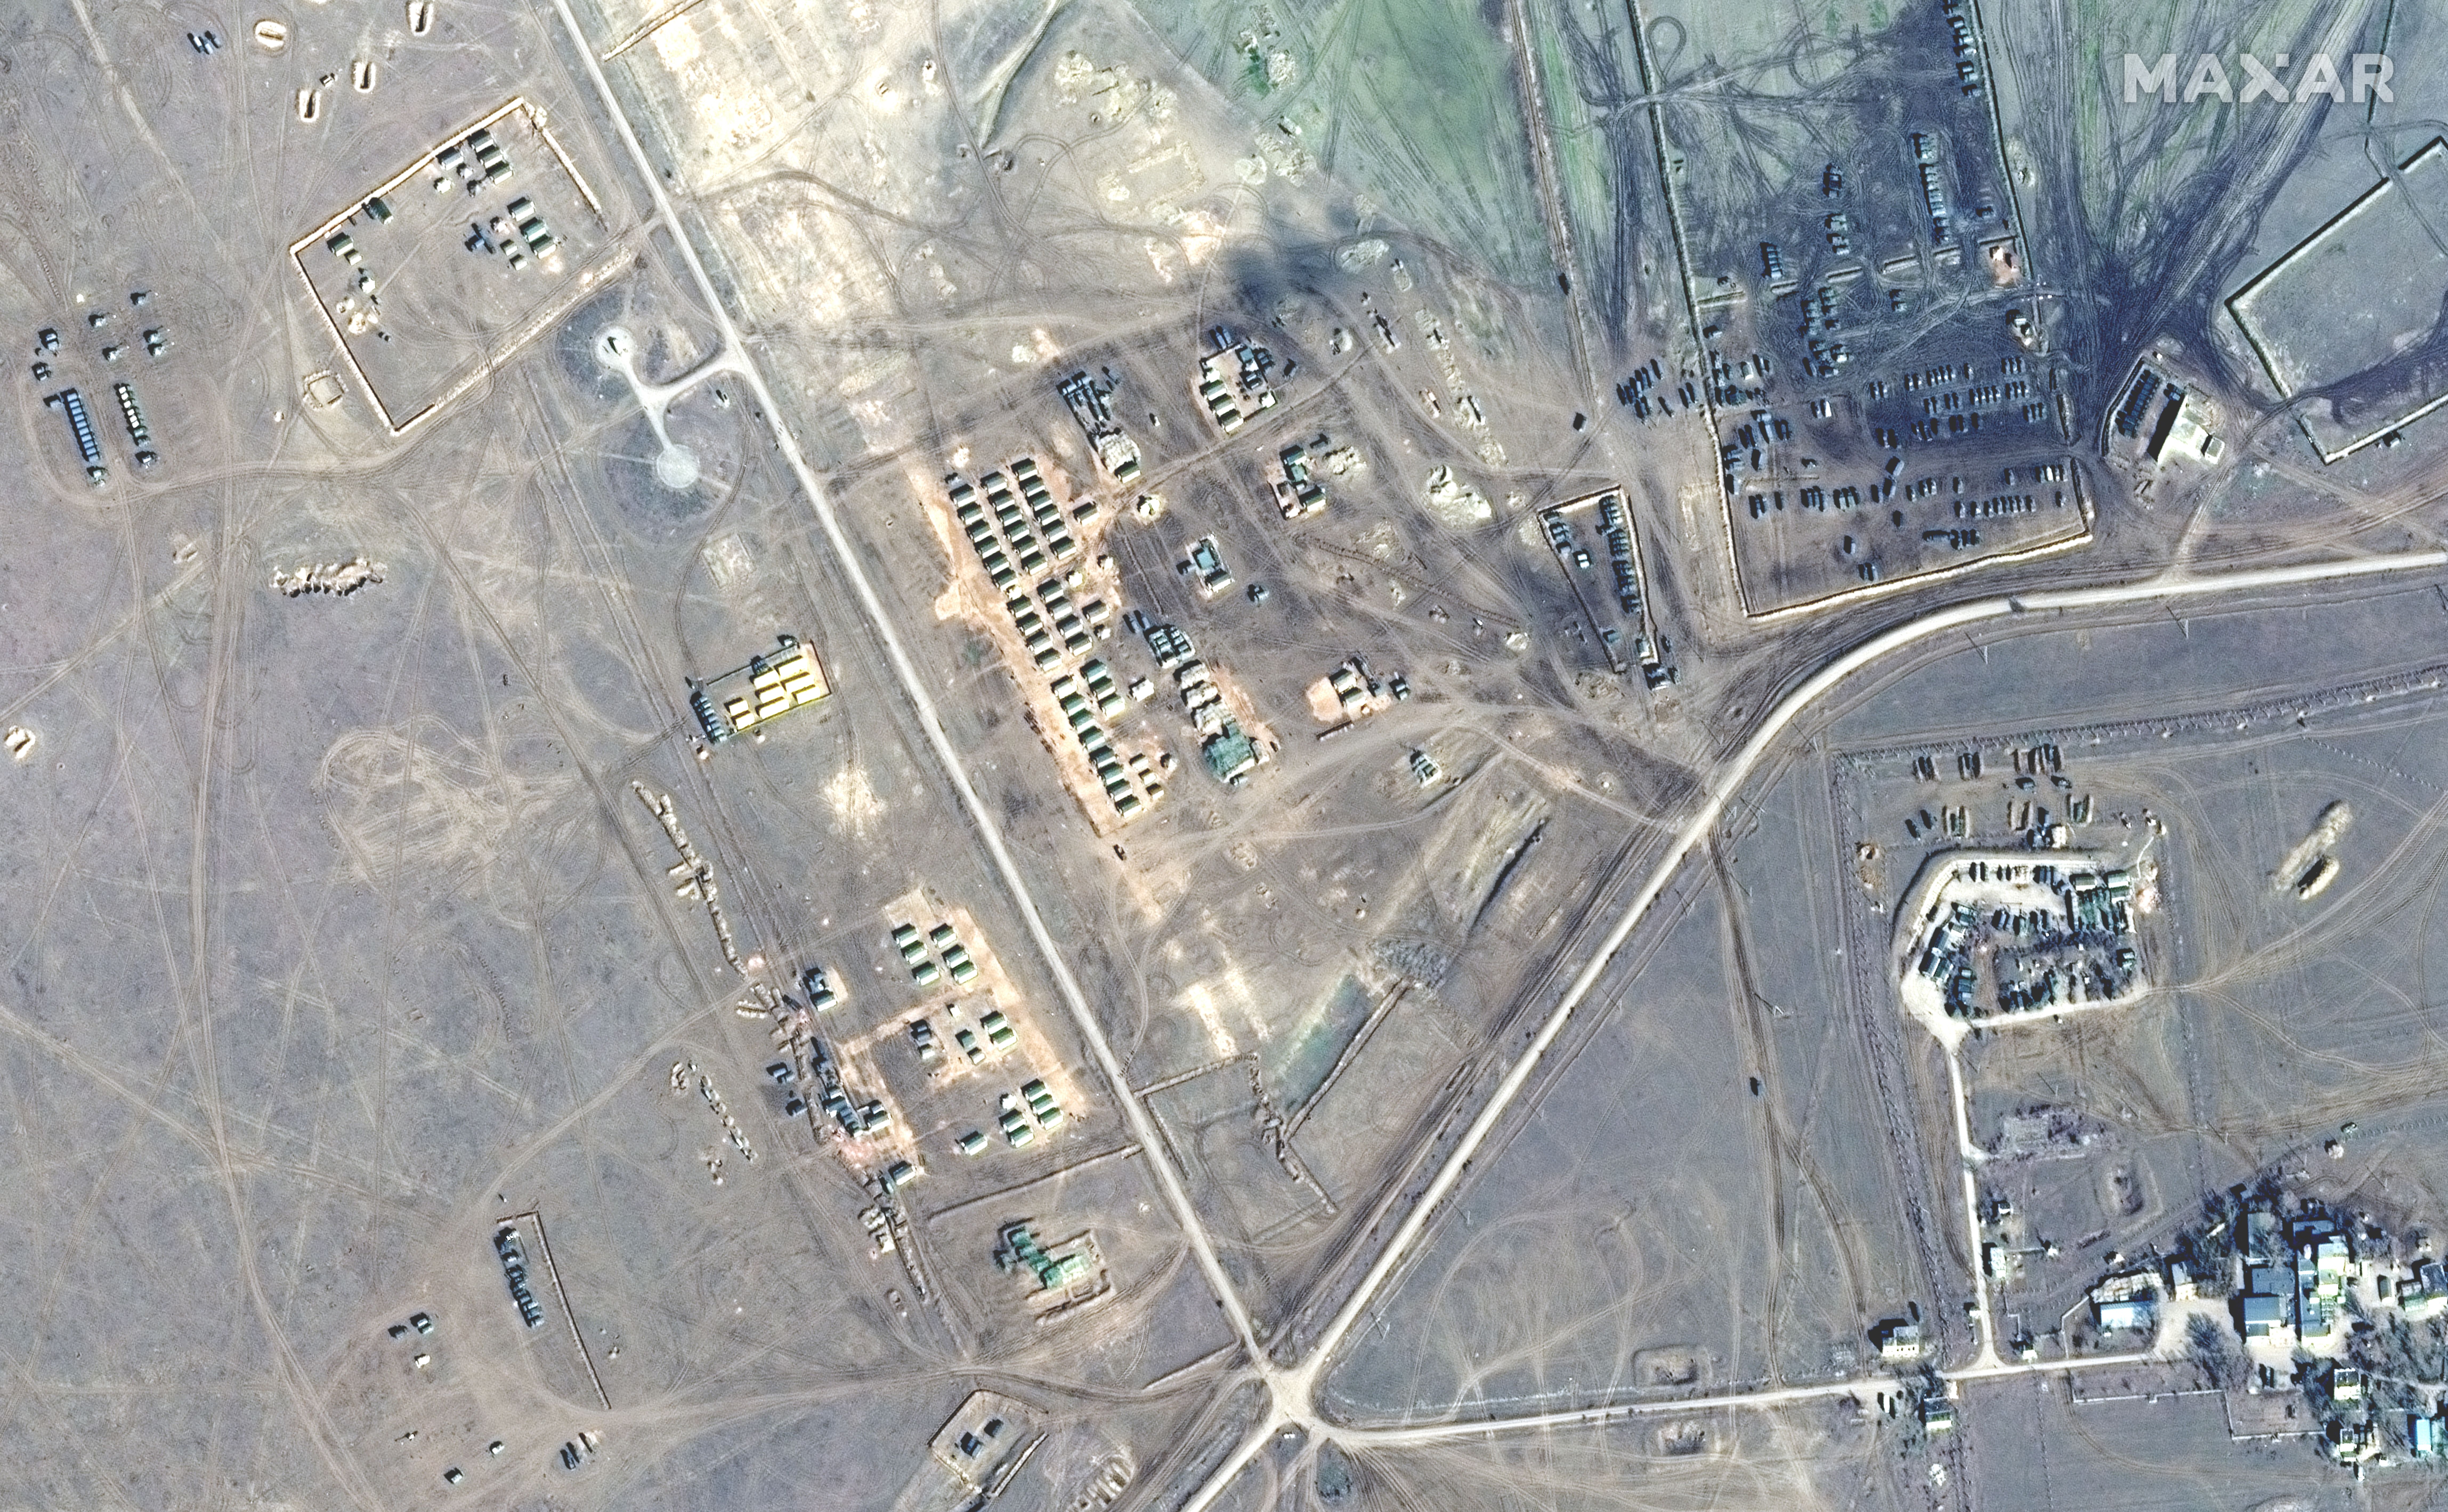 An image of tents and artillery pieces stationed in Crimea captured on Feb. 16.